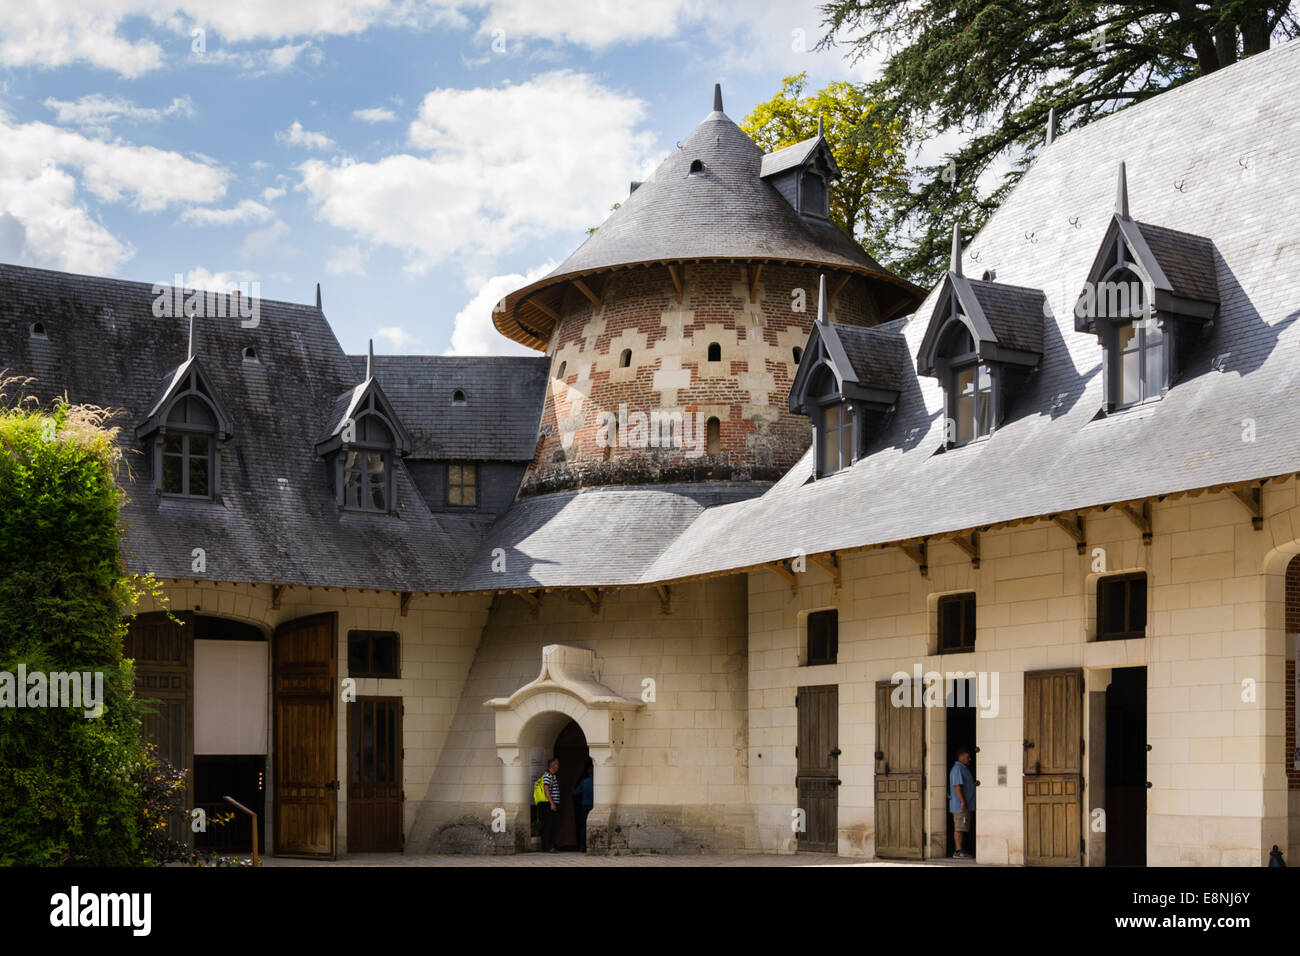 Stable in the castle of Chaumont sur Loire - France Stock Photo